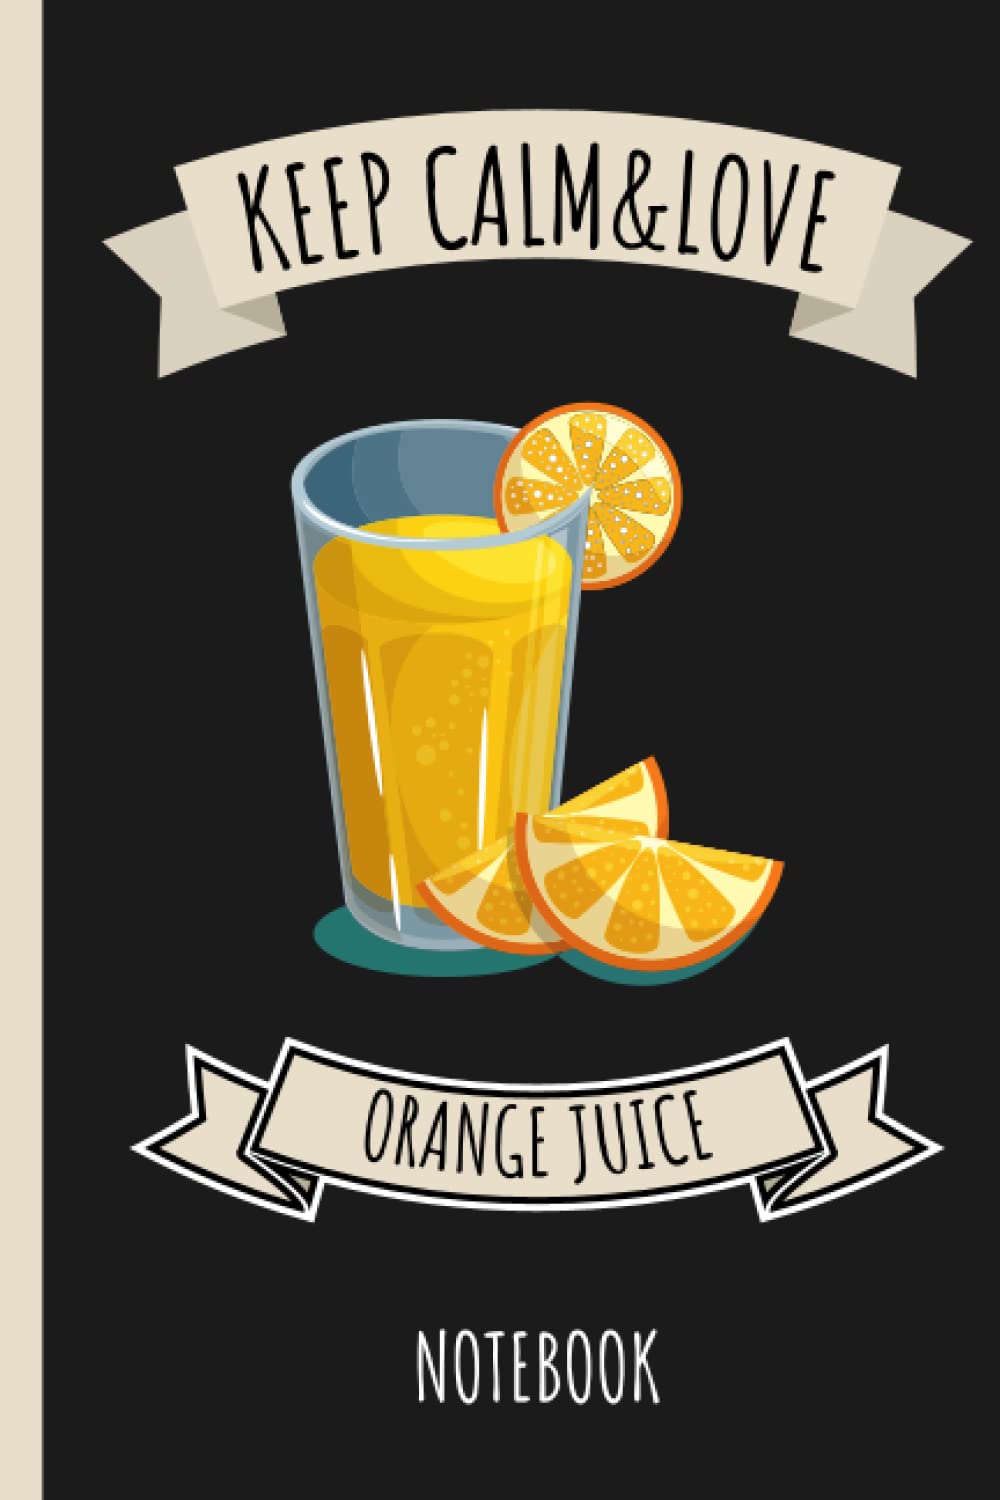 Keep Calm And Love Orange juice: Notebook for Orange juice Lovers | Funny Notebook Perfect Gift for Orange juice Lovers | 6 x 9 inches, 110 pages (German Edition)